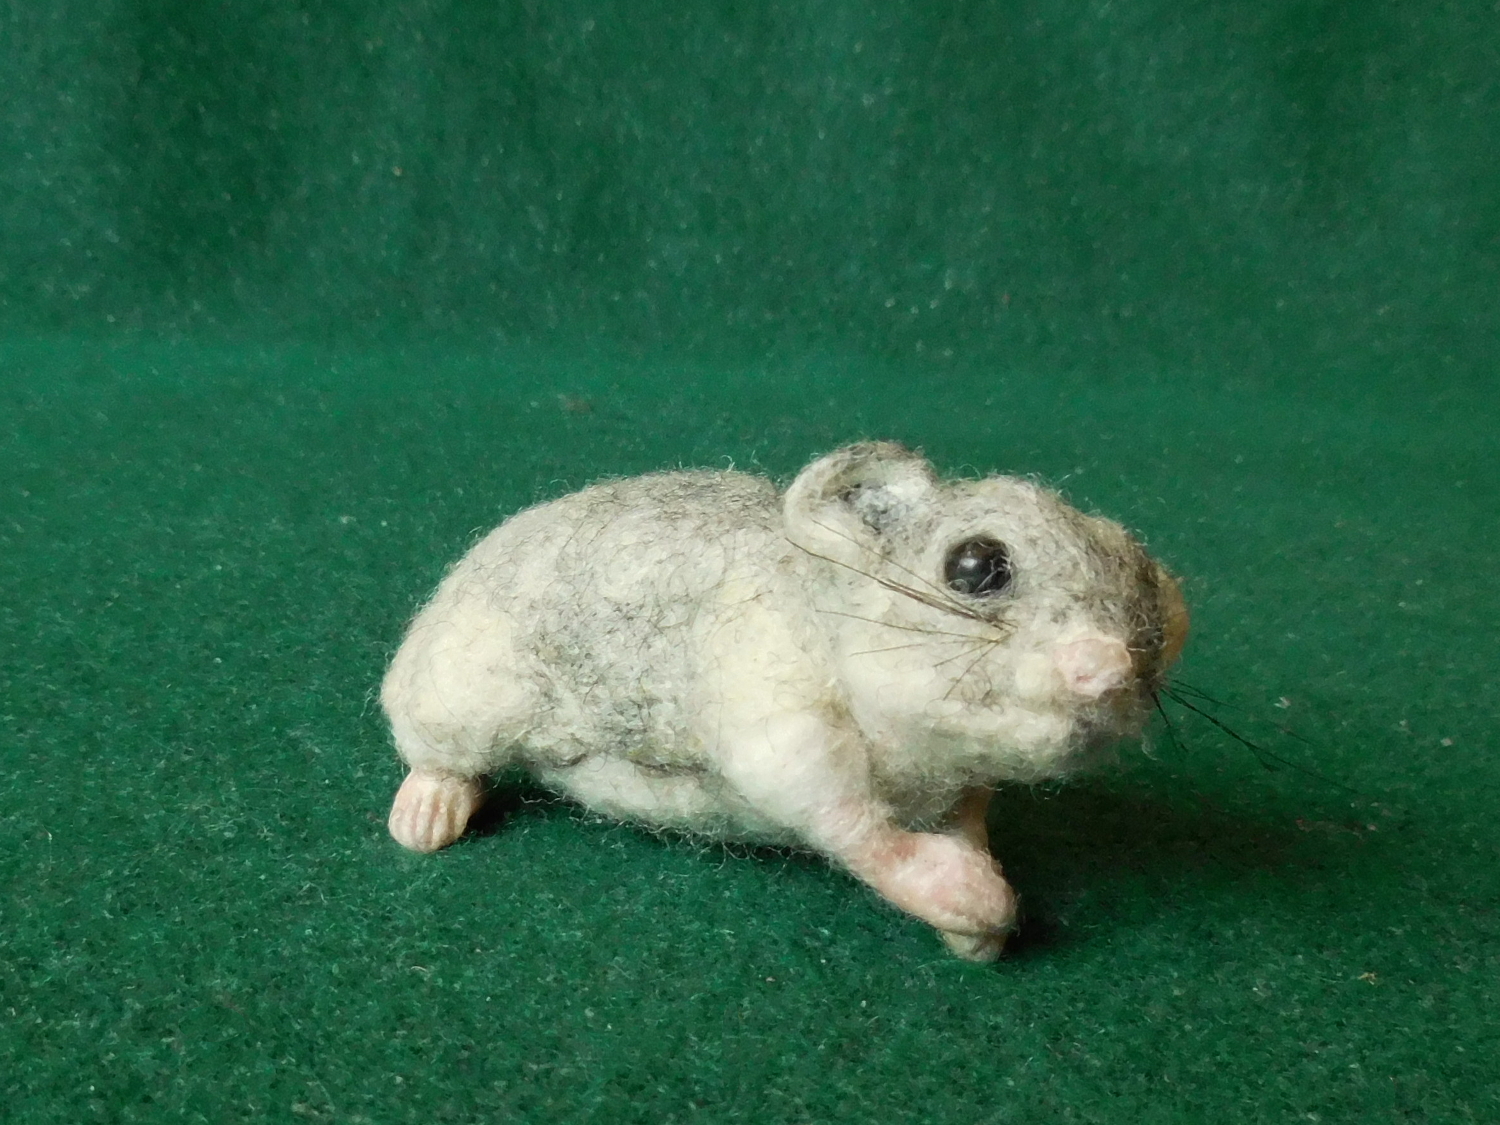 Westbound Hamster